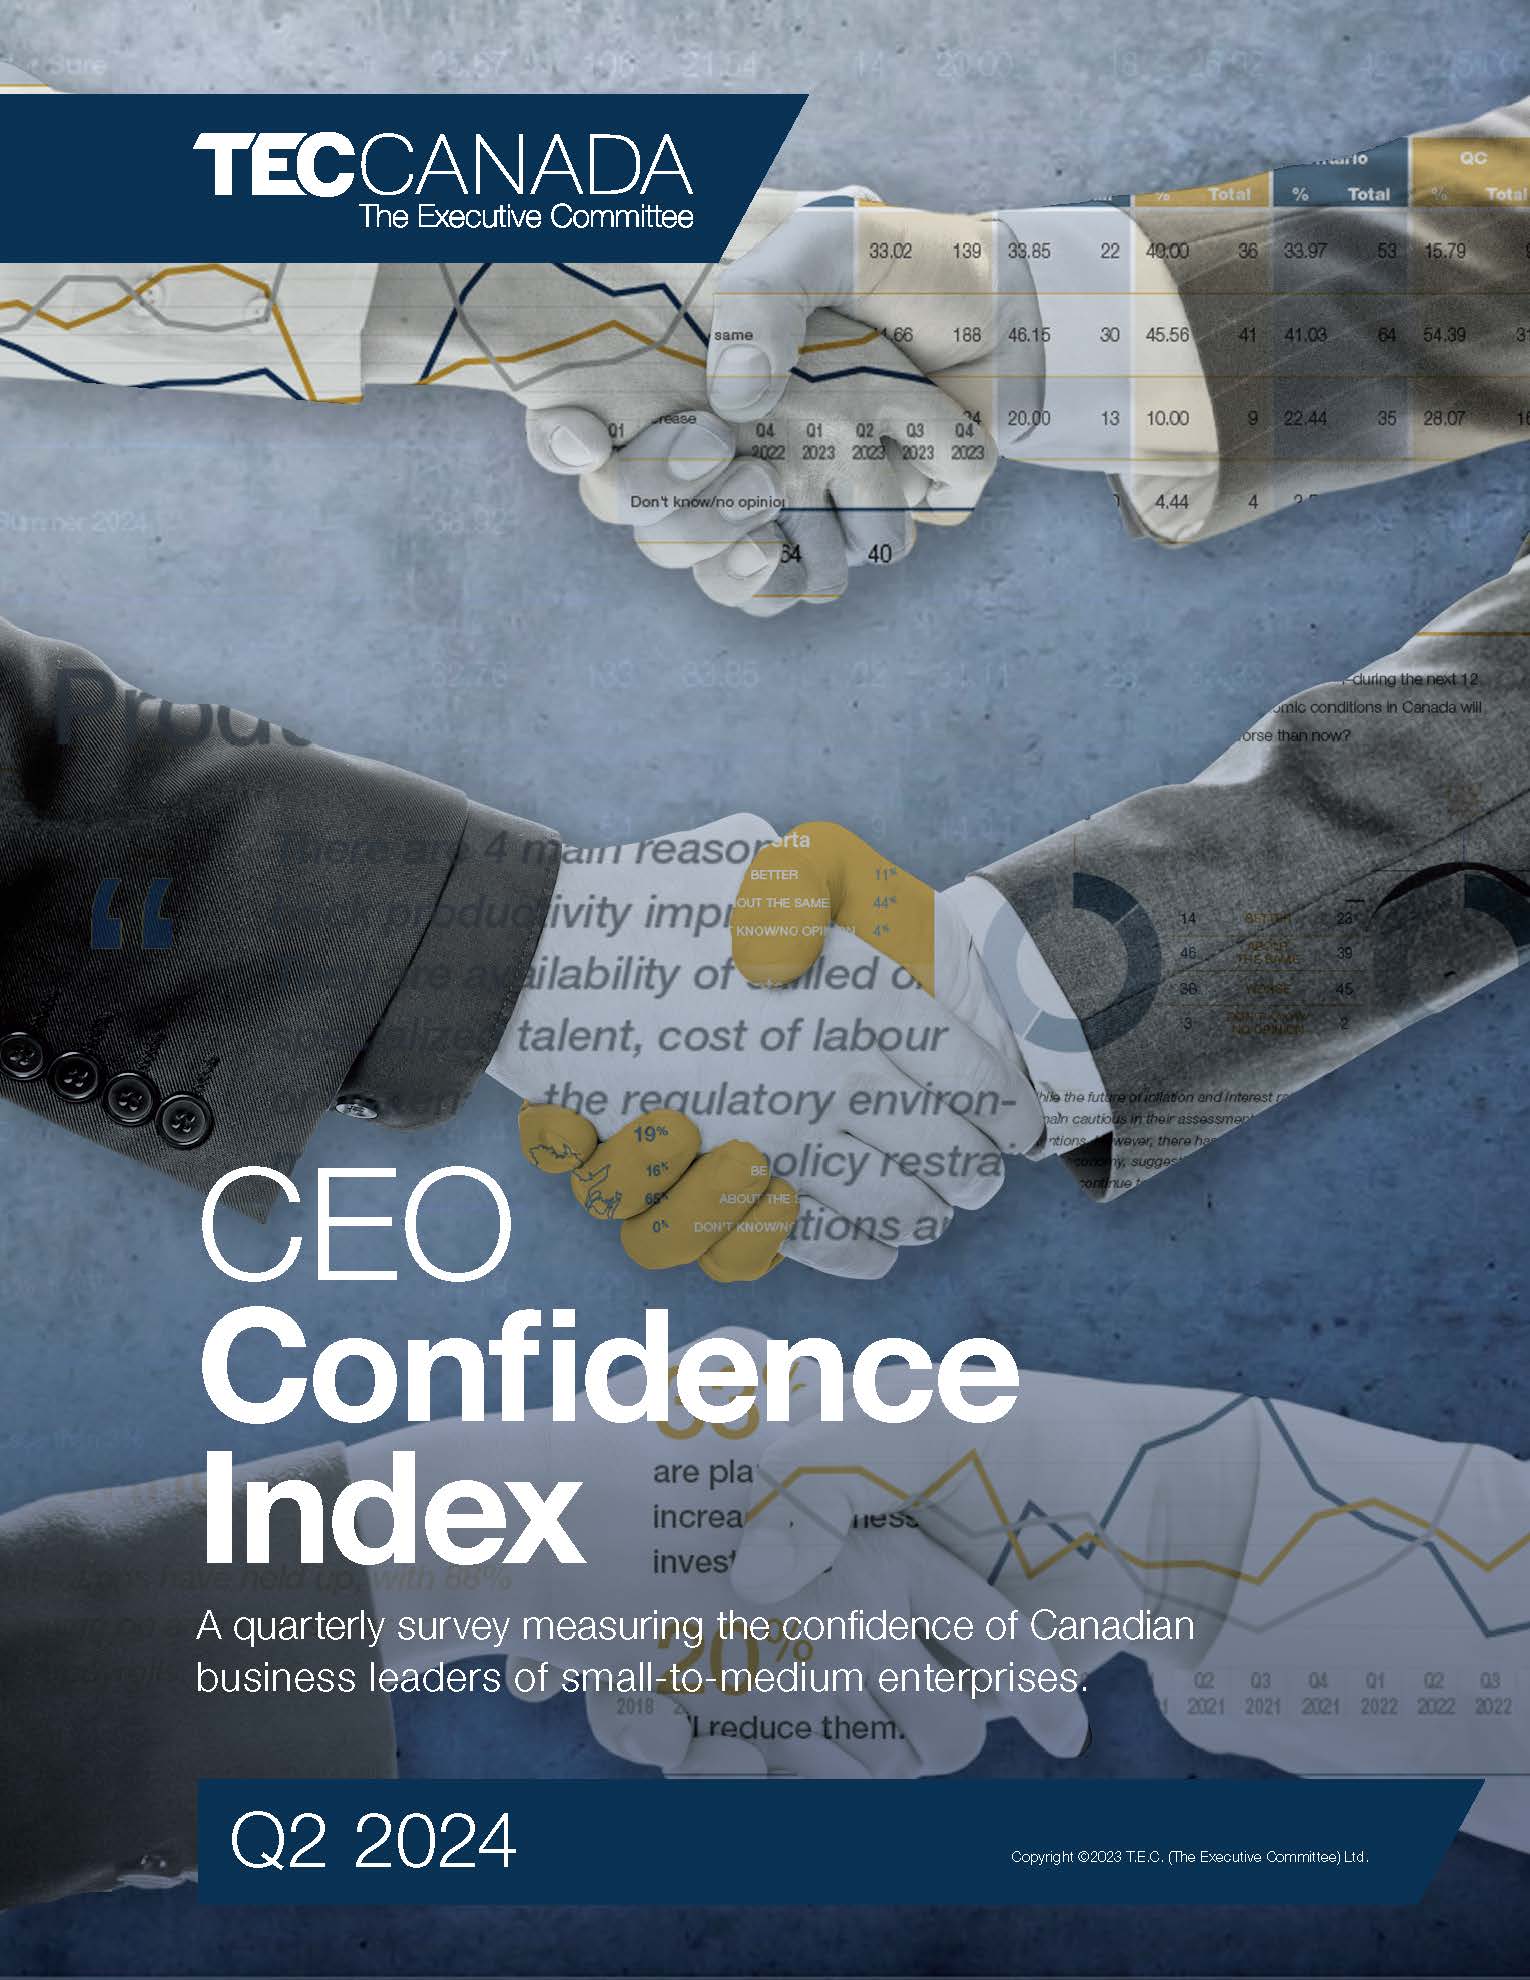 The TEC Canada CEO Confidence Index equips you to better understand your market position, industry peers, and competitors.